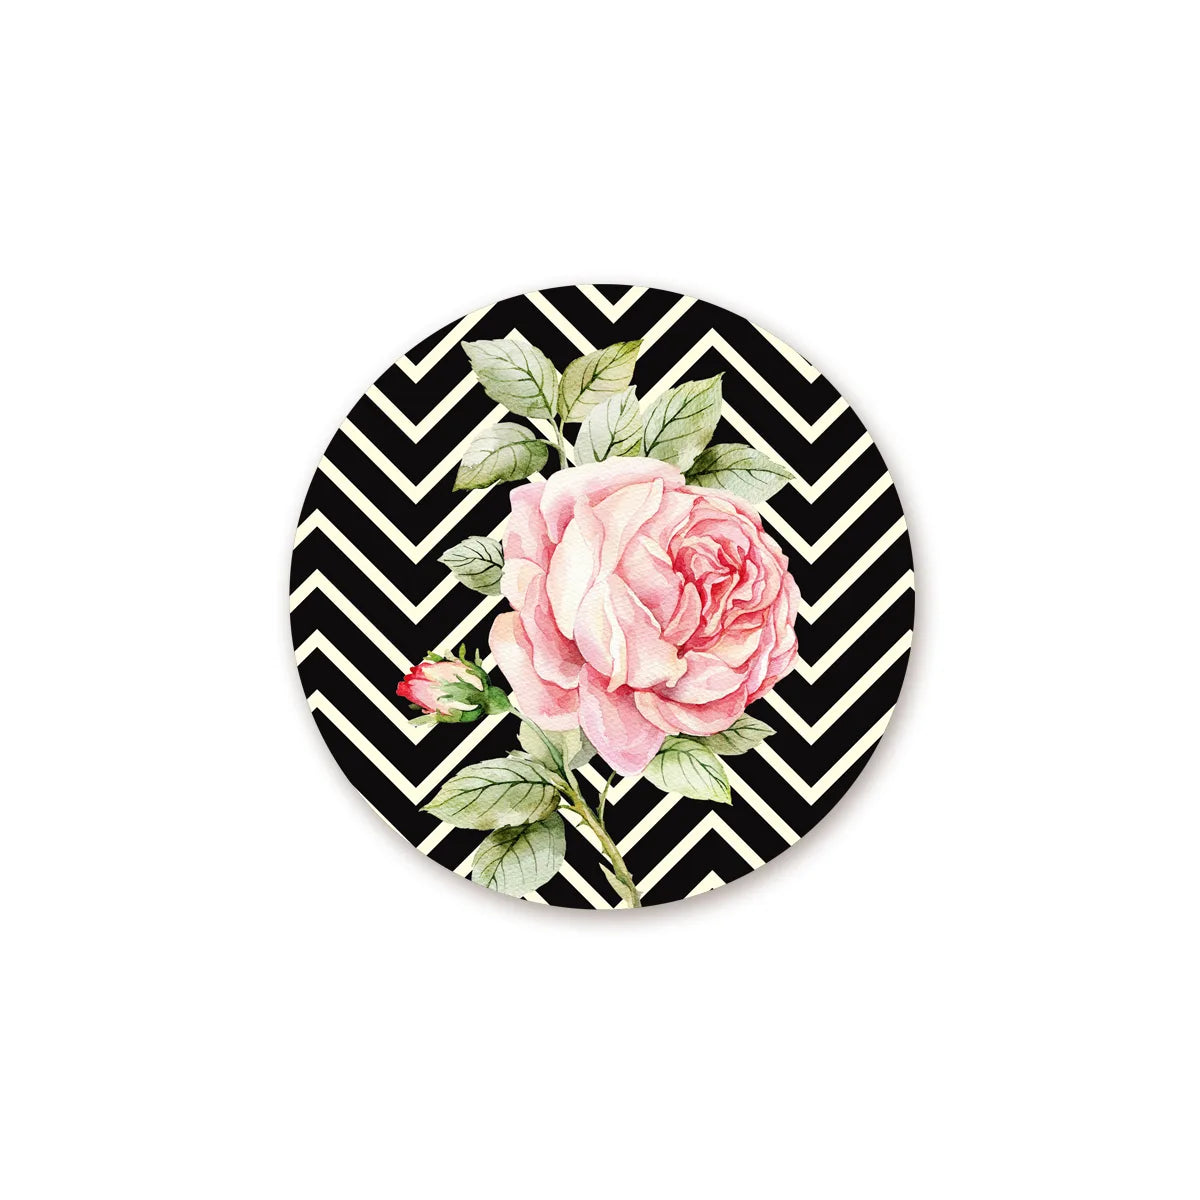 “Rose with Chevron Background” Coasters | CT 1085